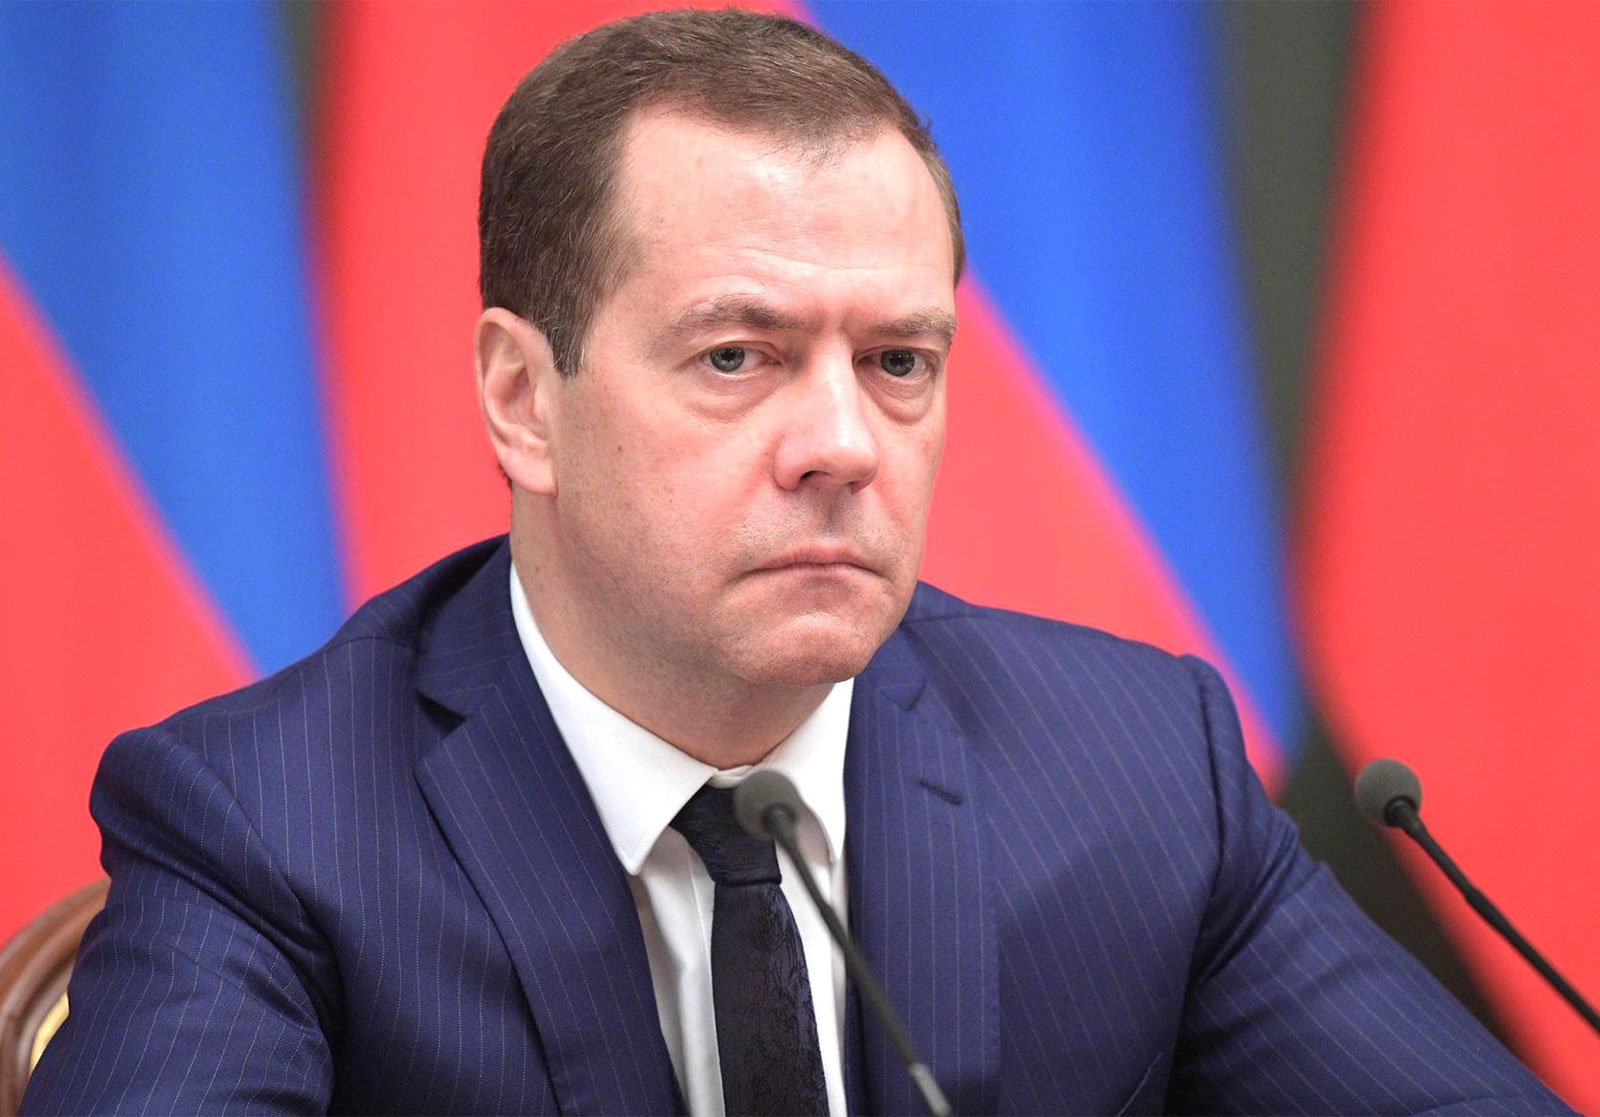 Israel's Intention To Supply Arms To Ukraine Will Destroy Relations With Russia - Medvedev